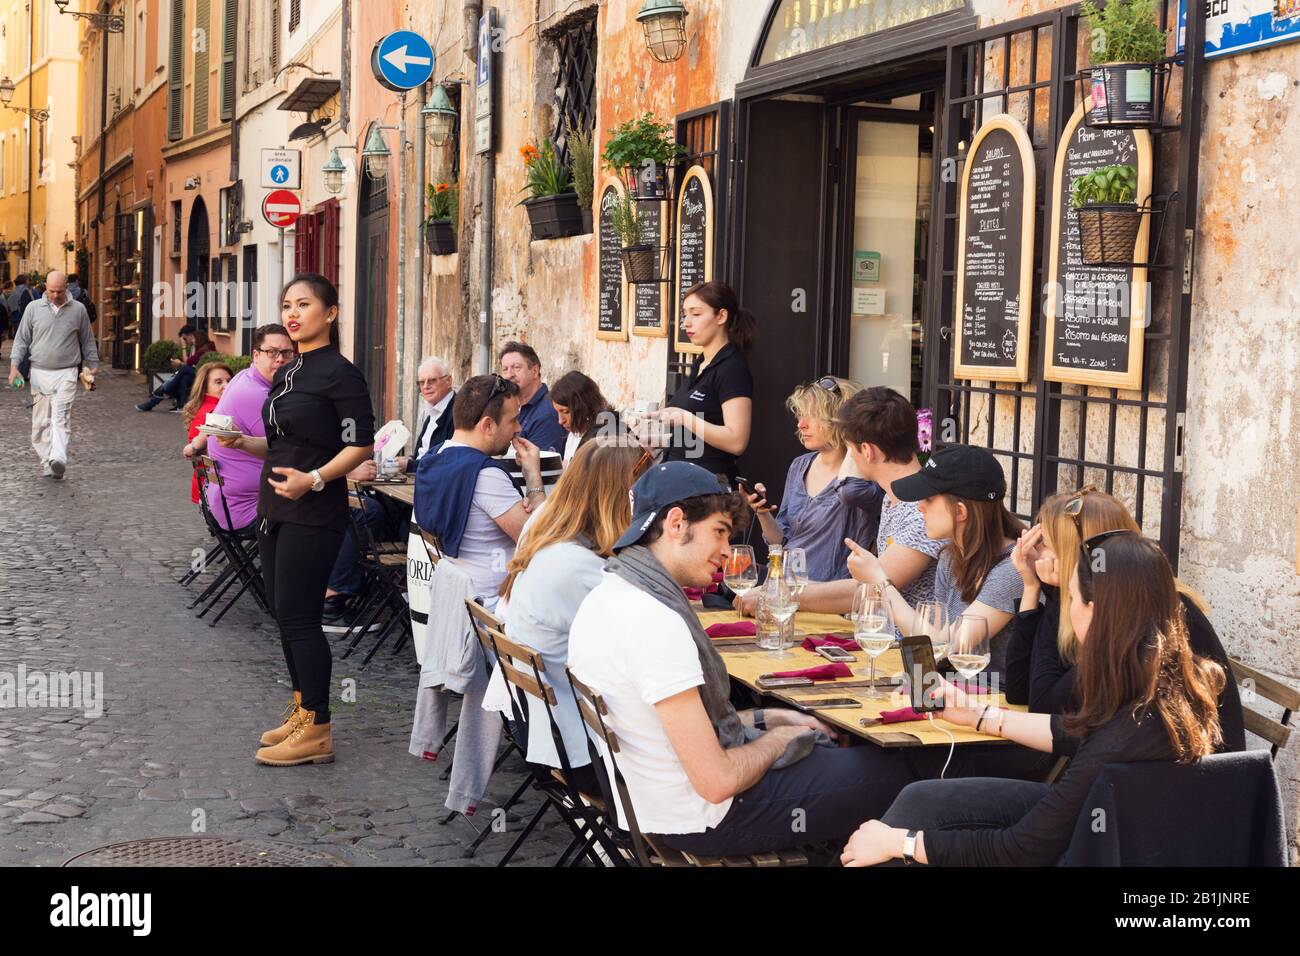 Customers at tables outside an Italian restaurant in Rome, Italy Stock Photo